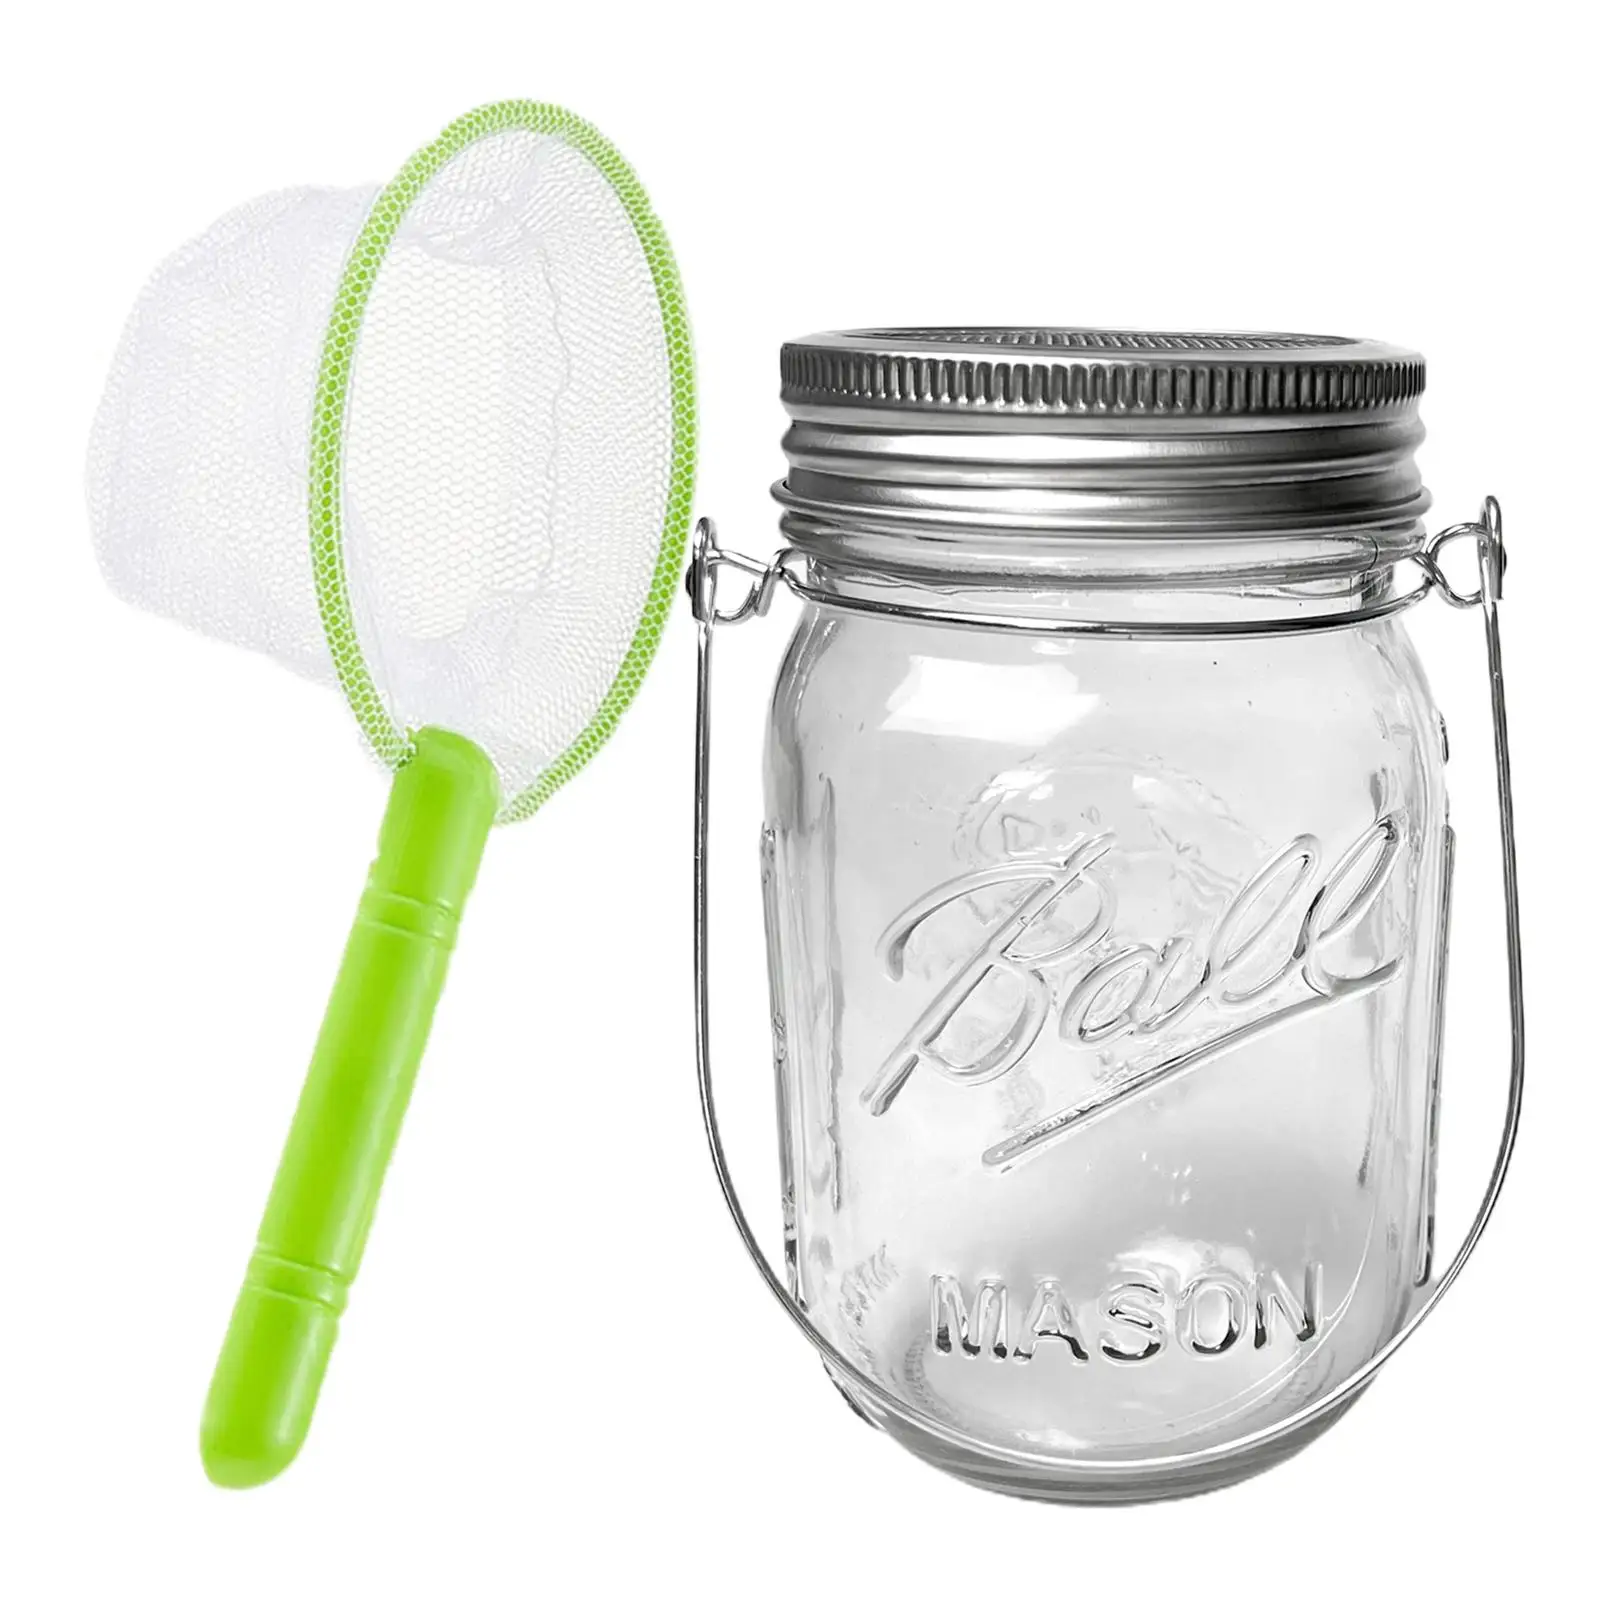 Kids outdoor Kit Jar with Lid and Handle Nature Exploration Butterfly Catcher Kit for Children Kids 7~14 Holiday Gifts